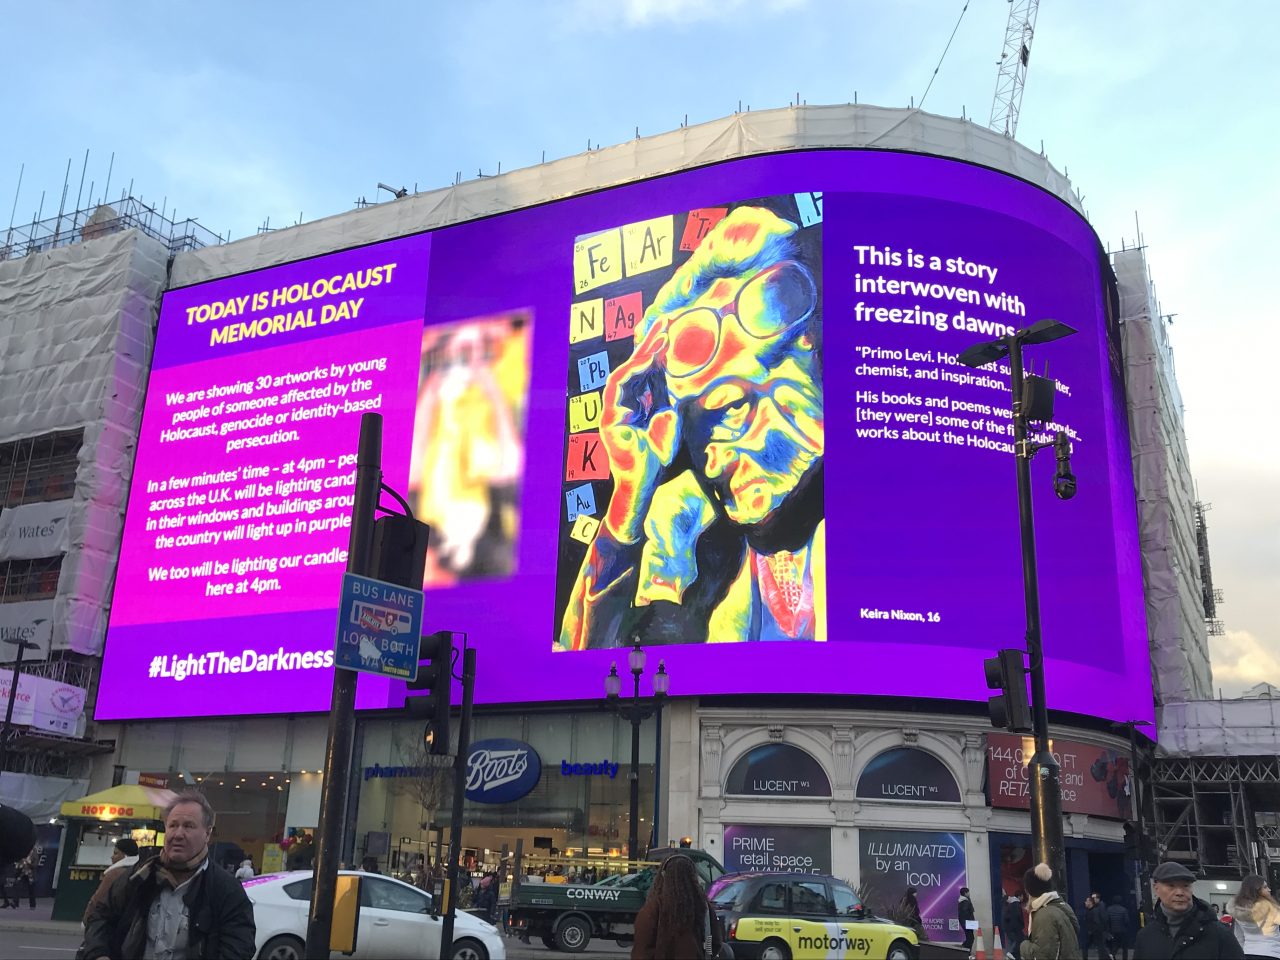 Piccadilly Lights display winning artworks from our [Extra]Ordinary Portraits exhibition